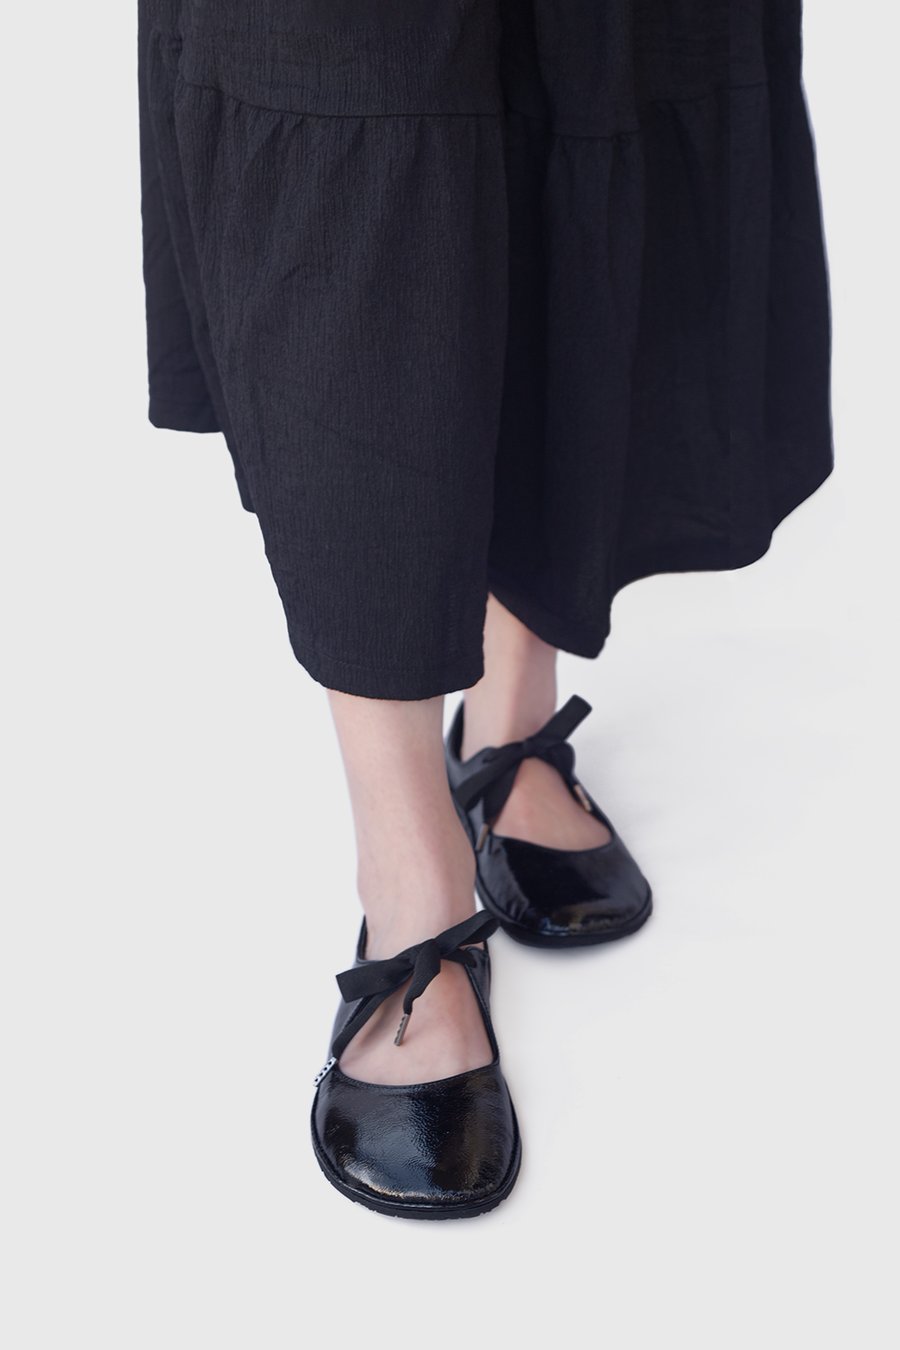 Image of Passion Ballet flats in Patent black - 37 EU and 38 EU Ready to ship 